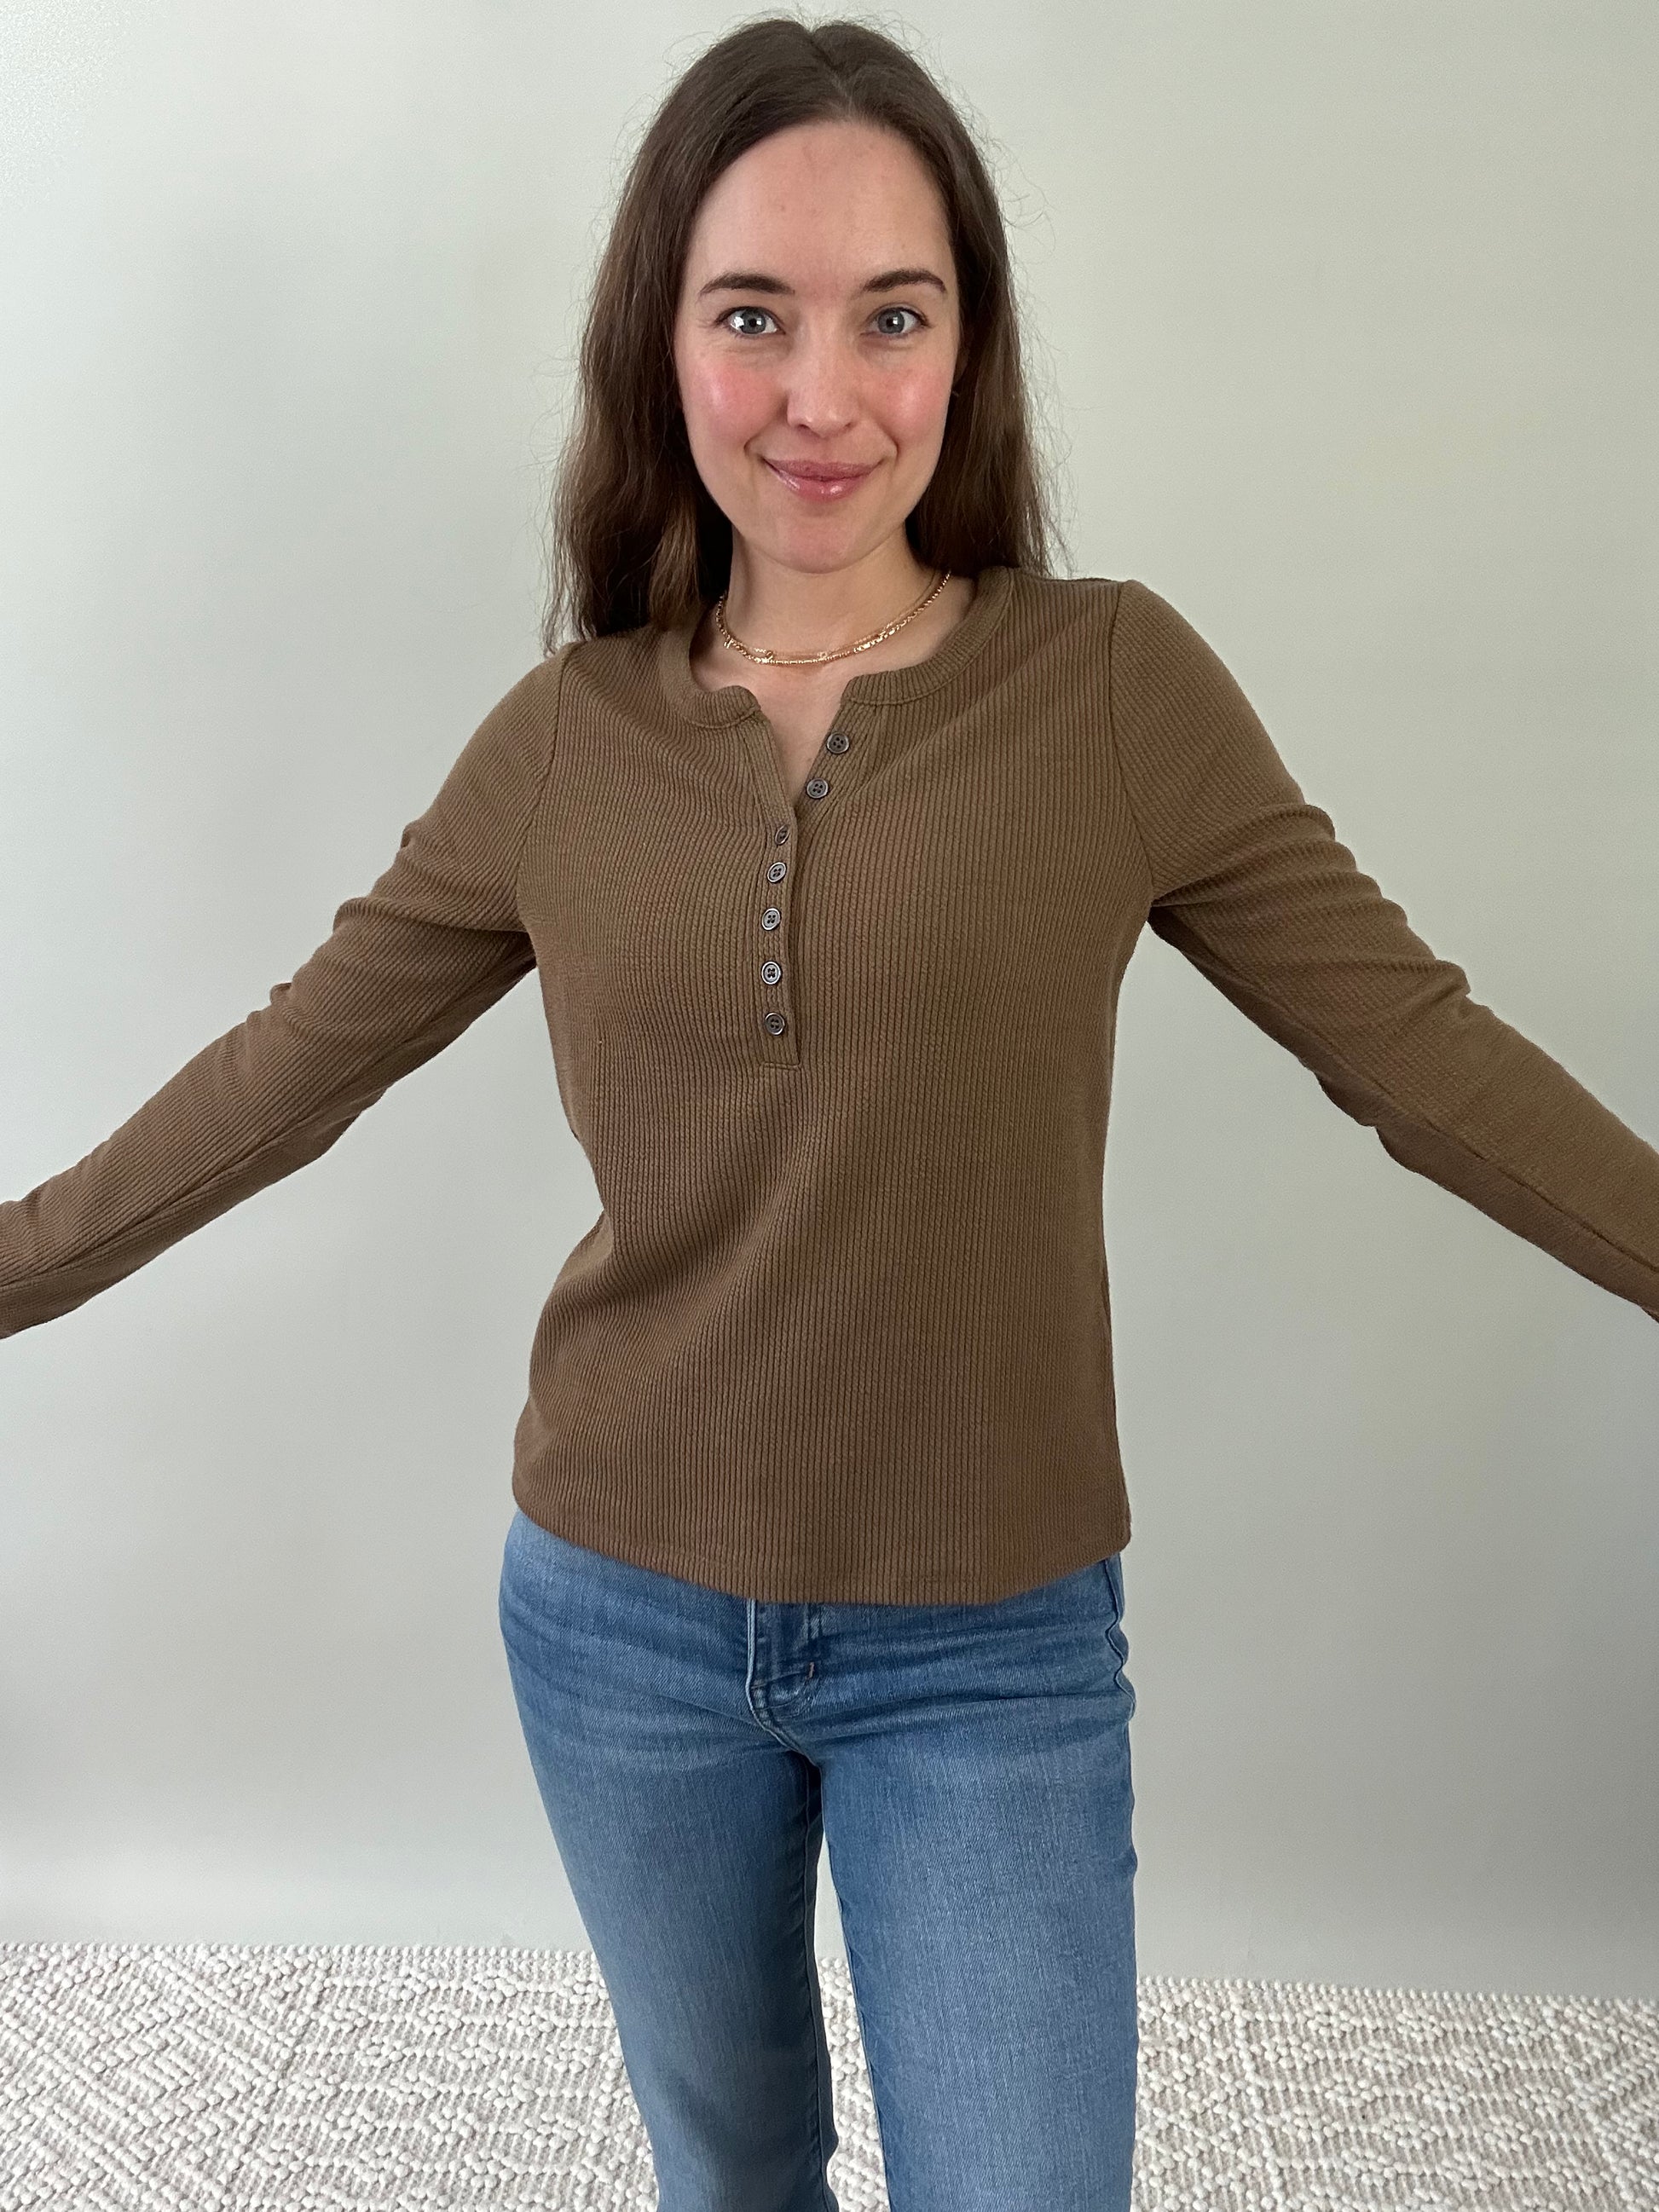 The Olivia Top - textured brown and olive long sleeve shirt great for layering